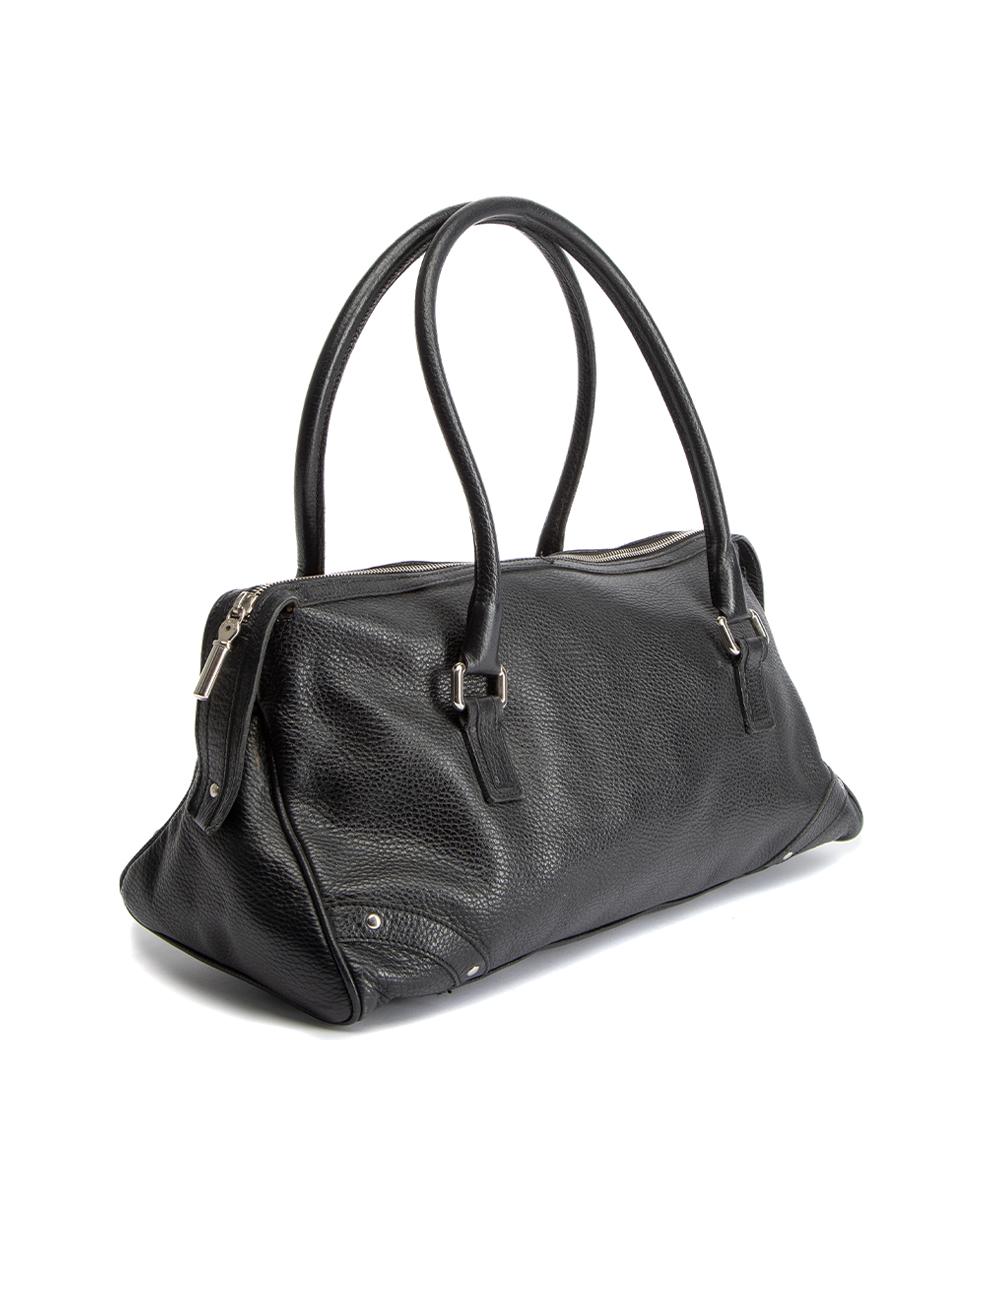 CONDITION is Good. Minor wear to bag is evident. Light wear to the leather exterior where there are used corners and finishing missing to the bag handles. There is also natural folding to the bag from use, and wear to the inner lining. A dark stain